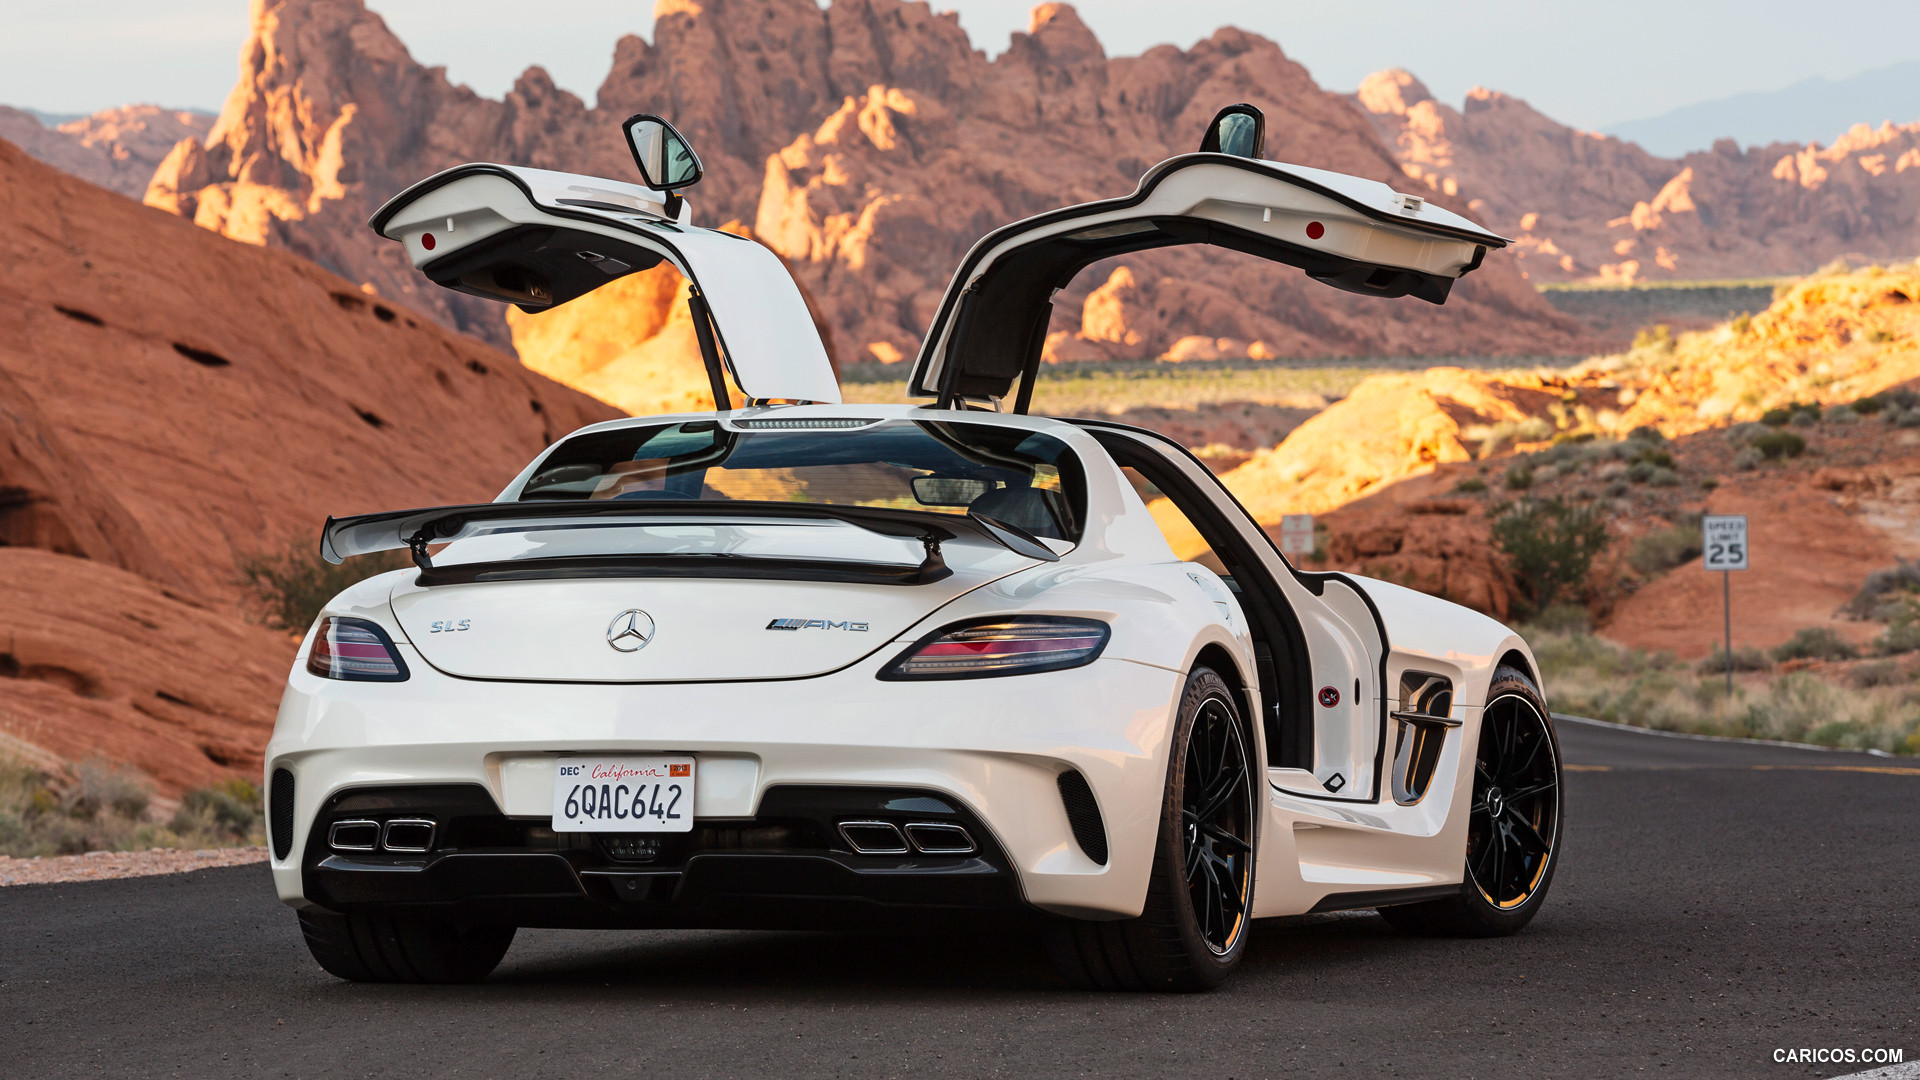 2014 Mercedes-Benz SLS AMG Coupe Black Series White - Rear, #12 of 40